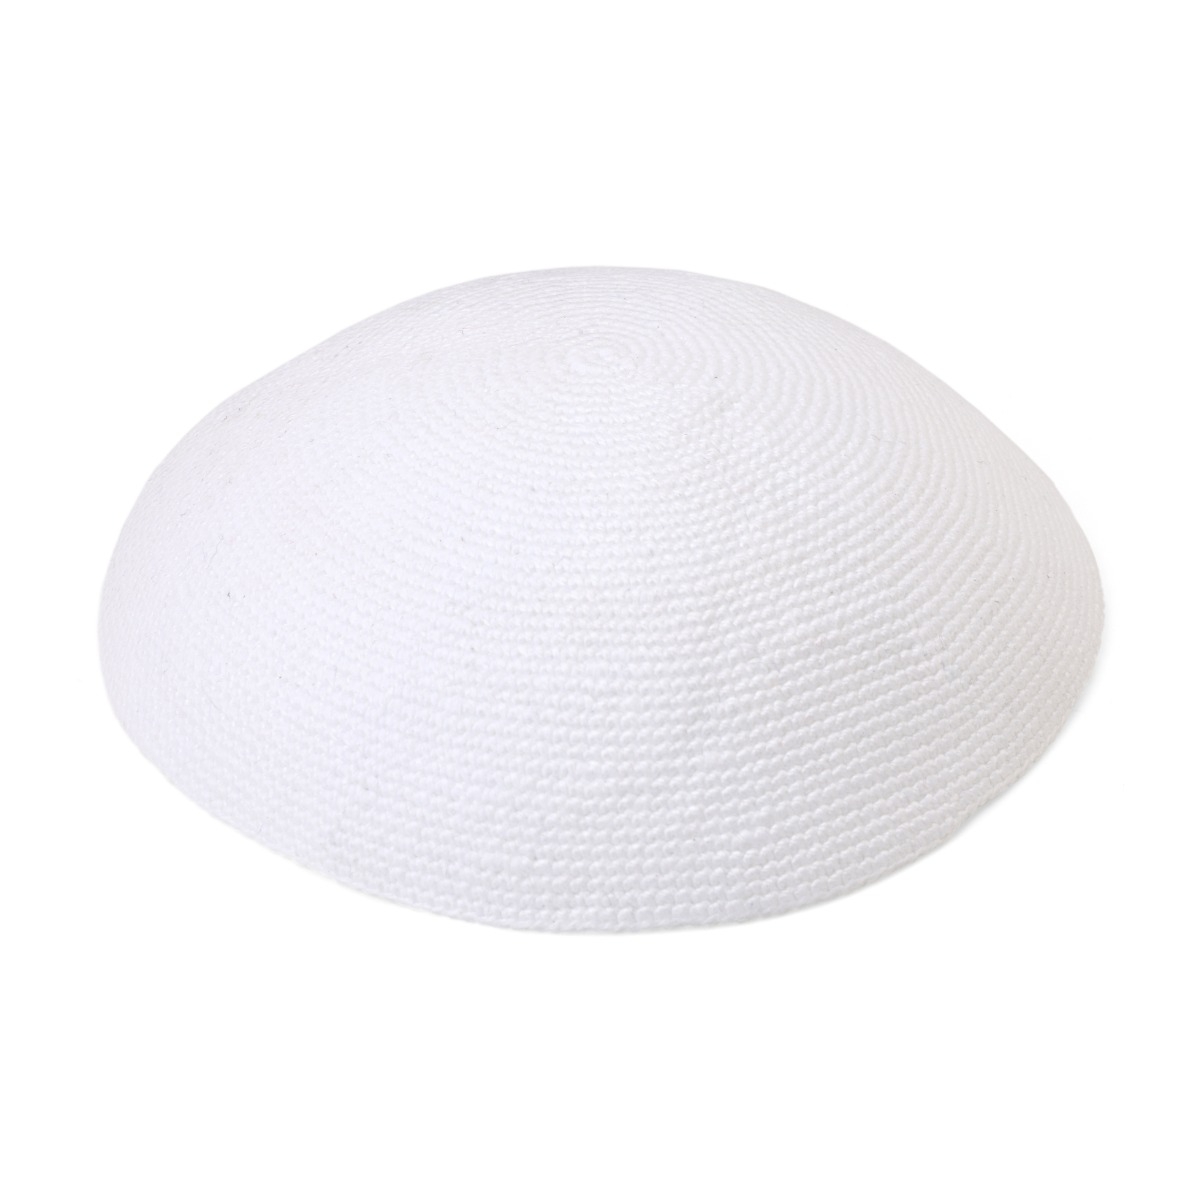 High-Quality Knitted Solid White Kippah - 1